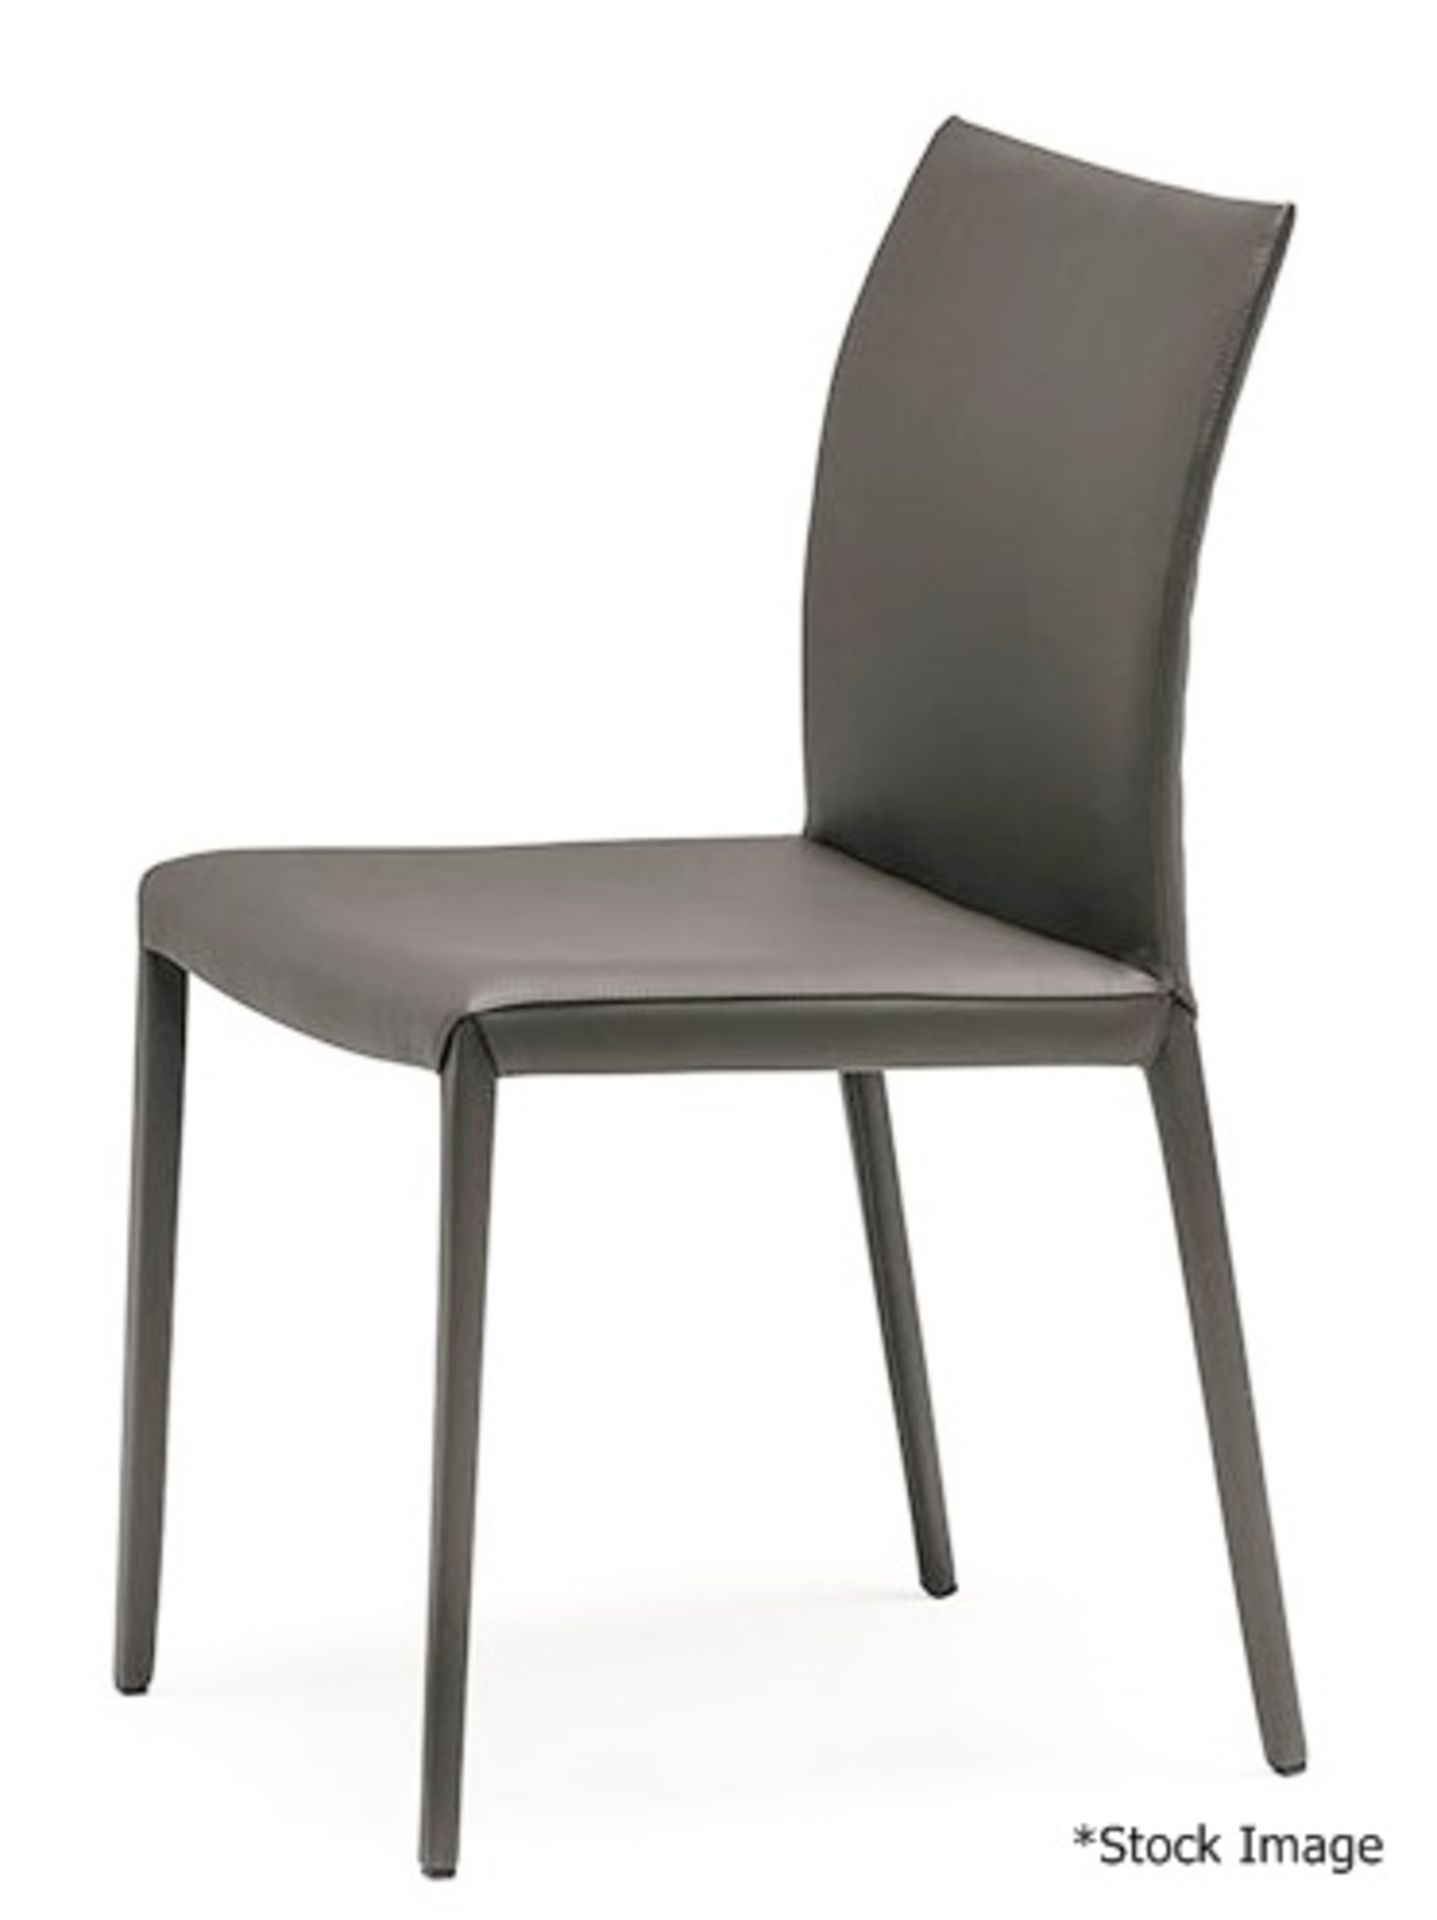 4 x CATELLAN 'Norma' Designer Italian Dining Chairs In Soft Grey Leather - Original RRP £3,840 - Image 5 of 7